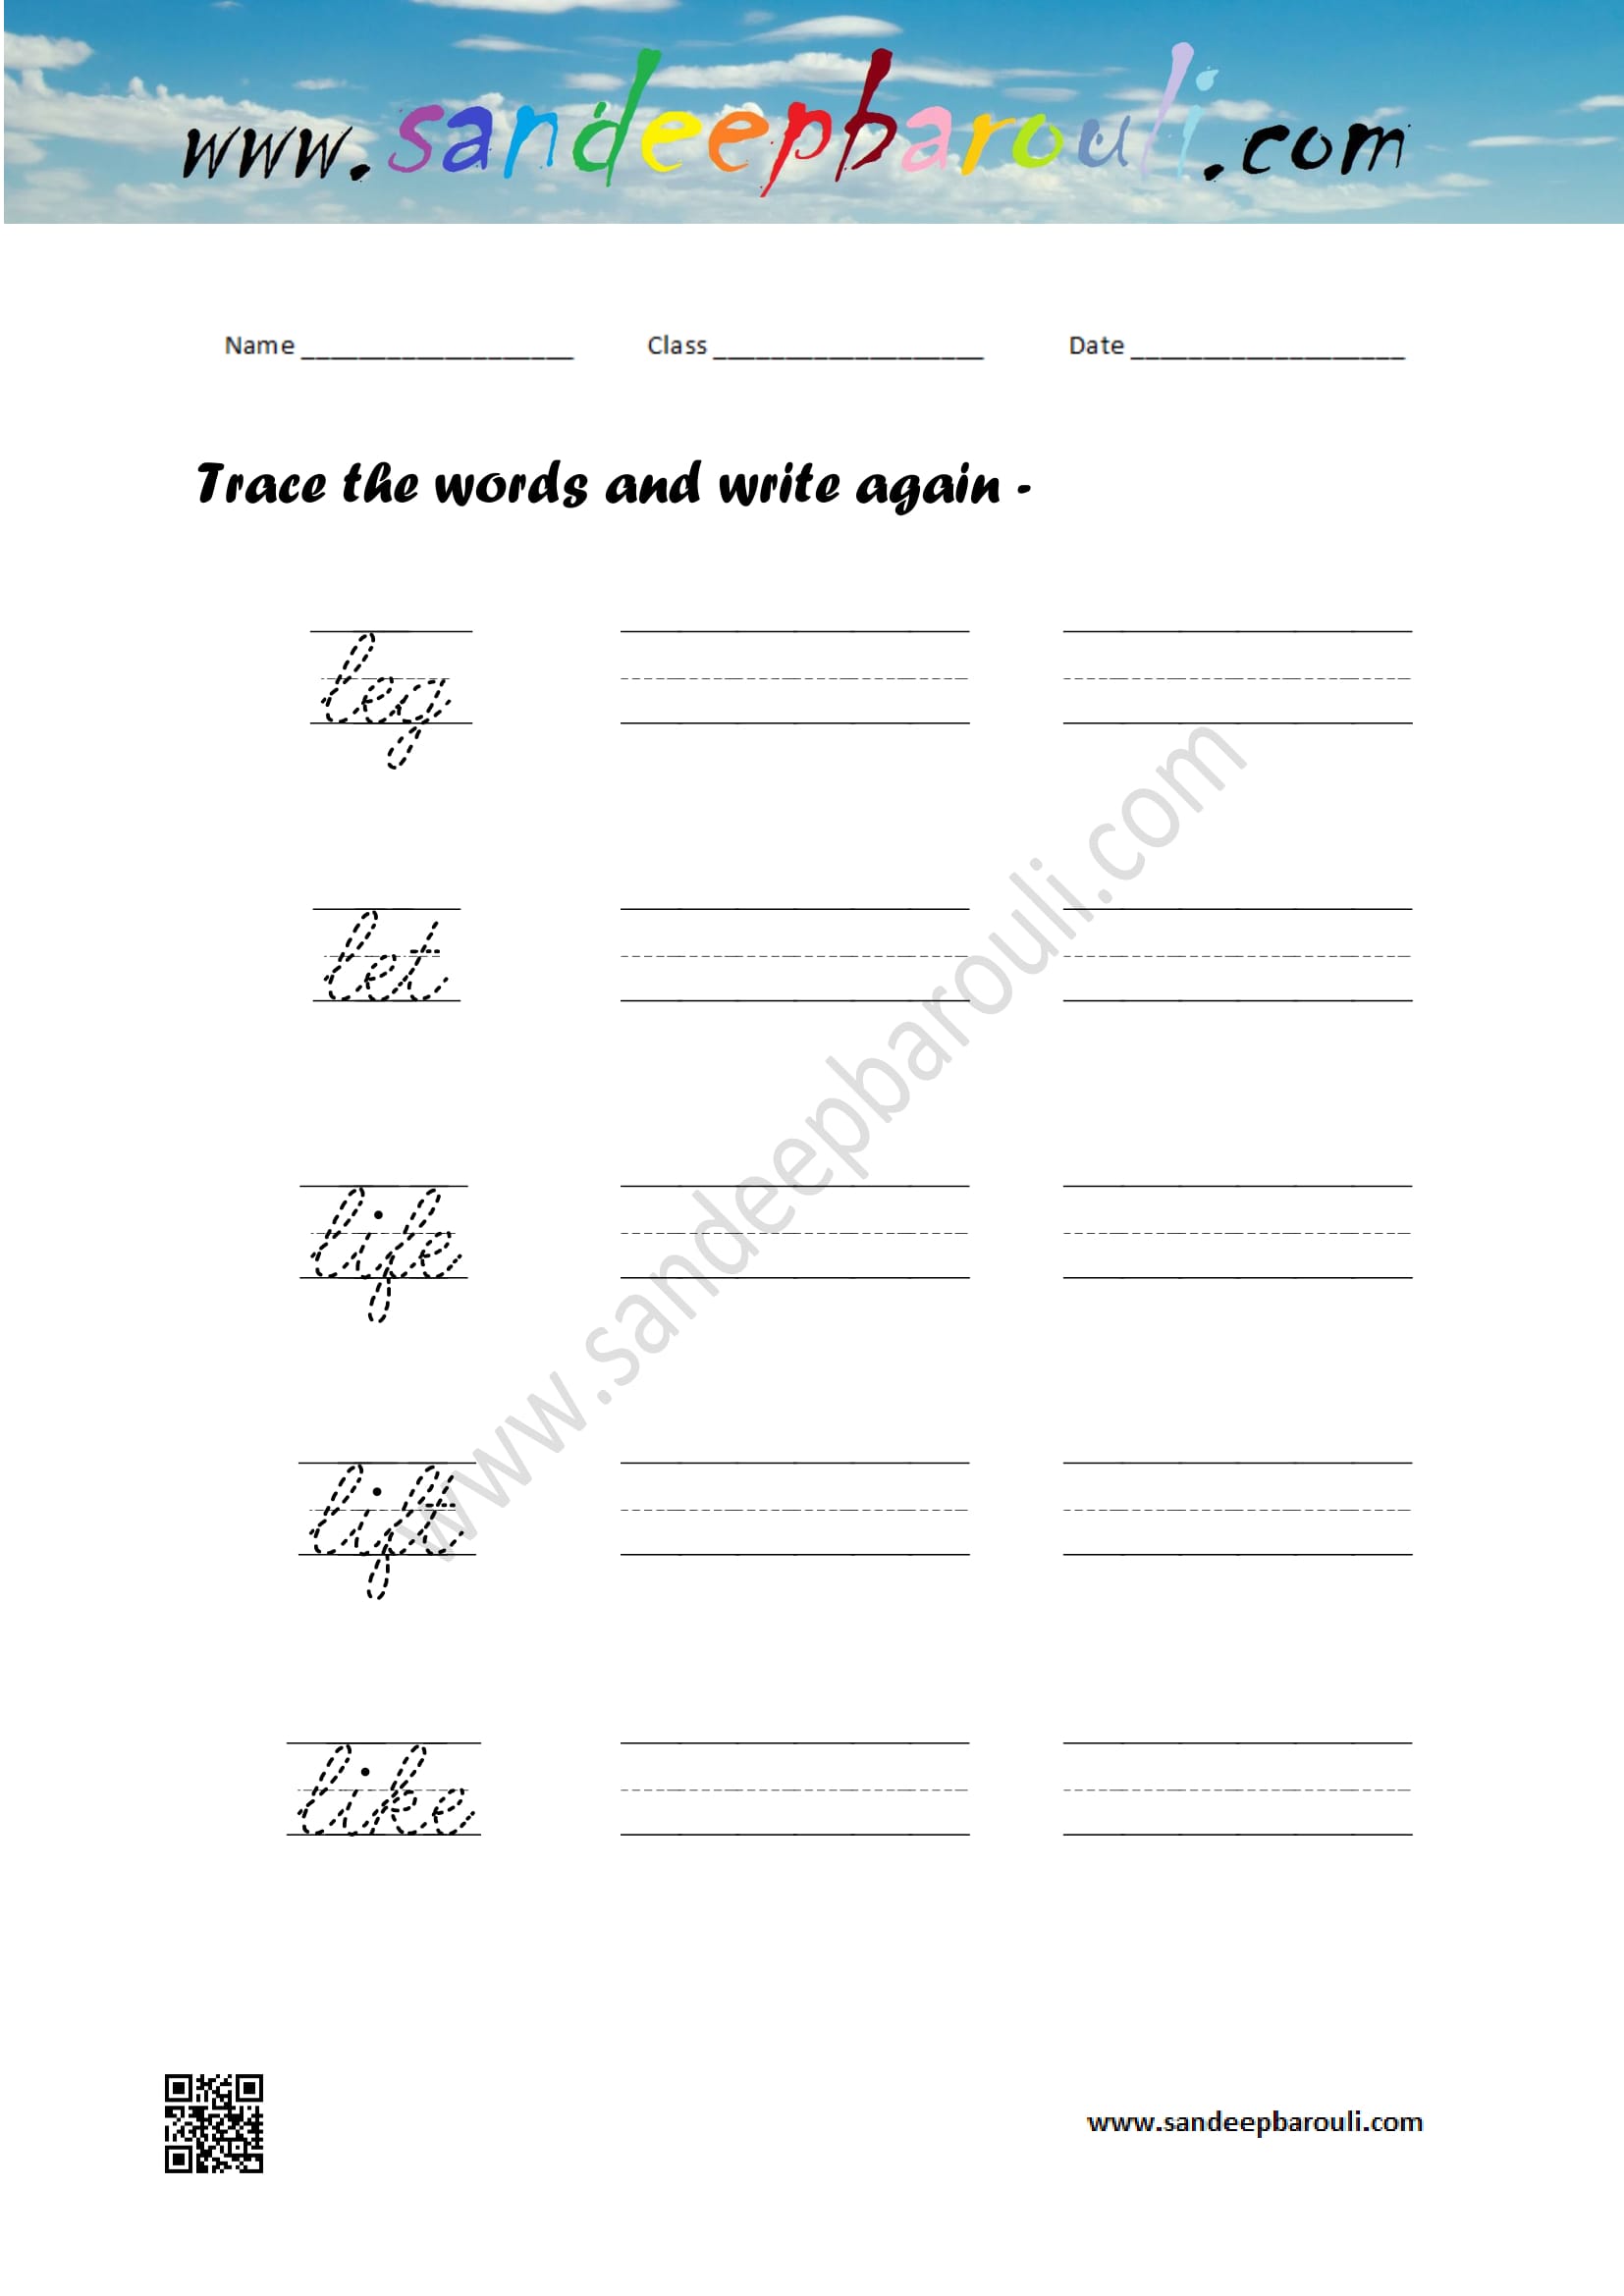 Cursive writing worksheet – trace the words and write again (15)